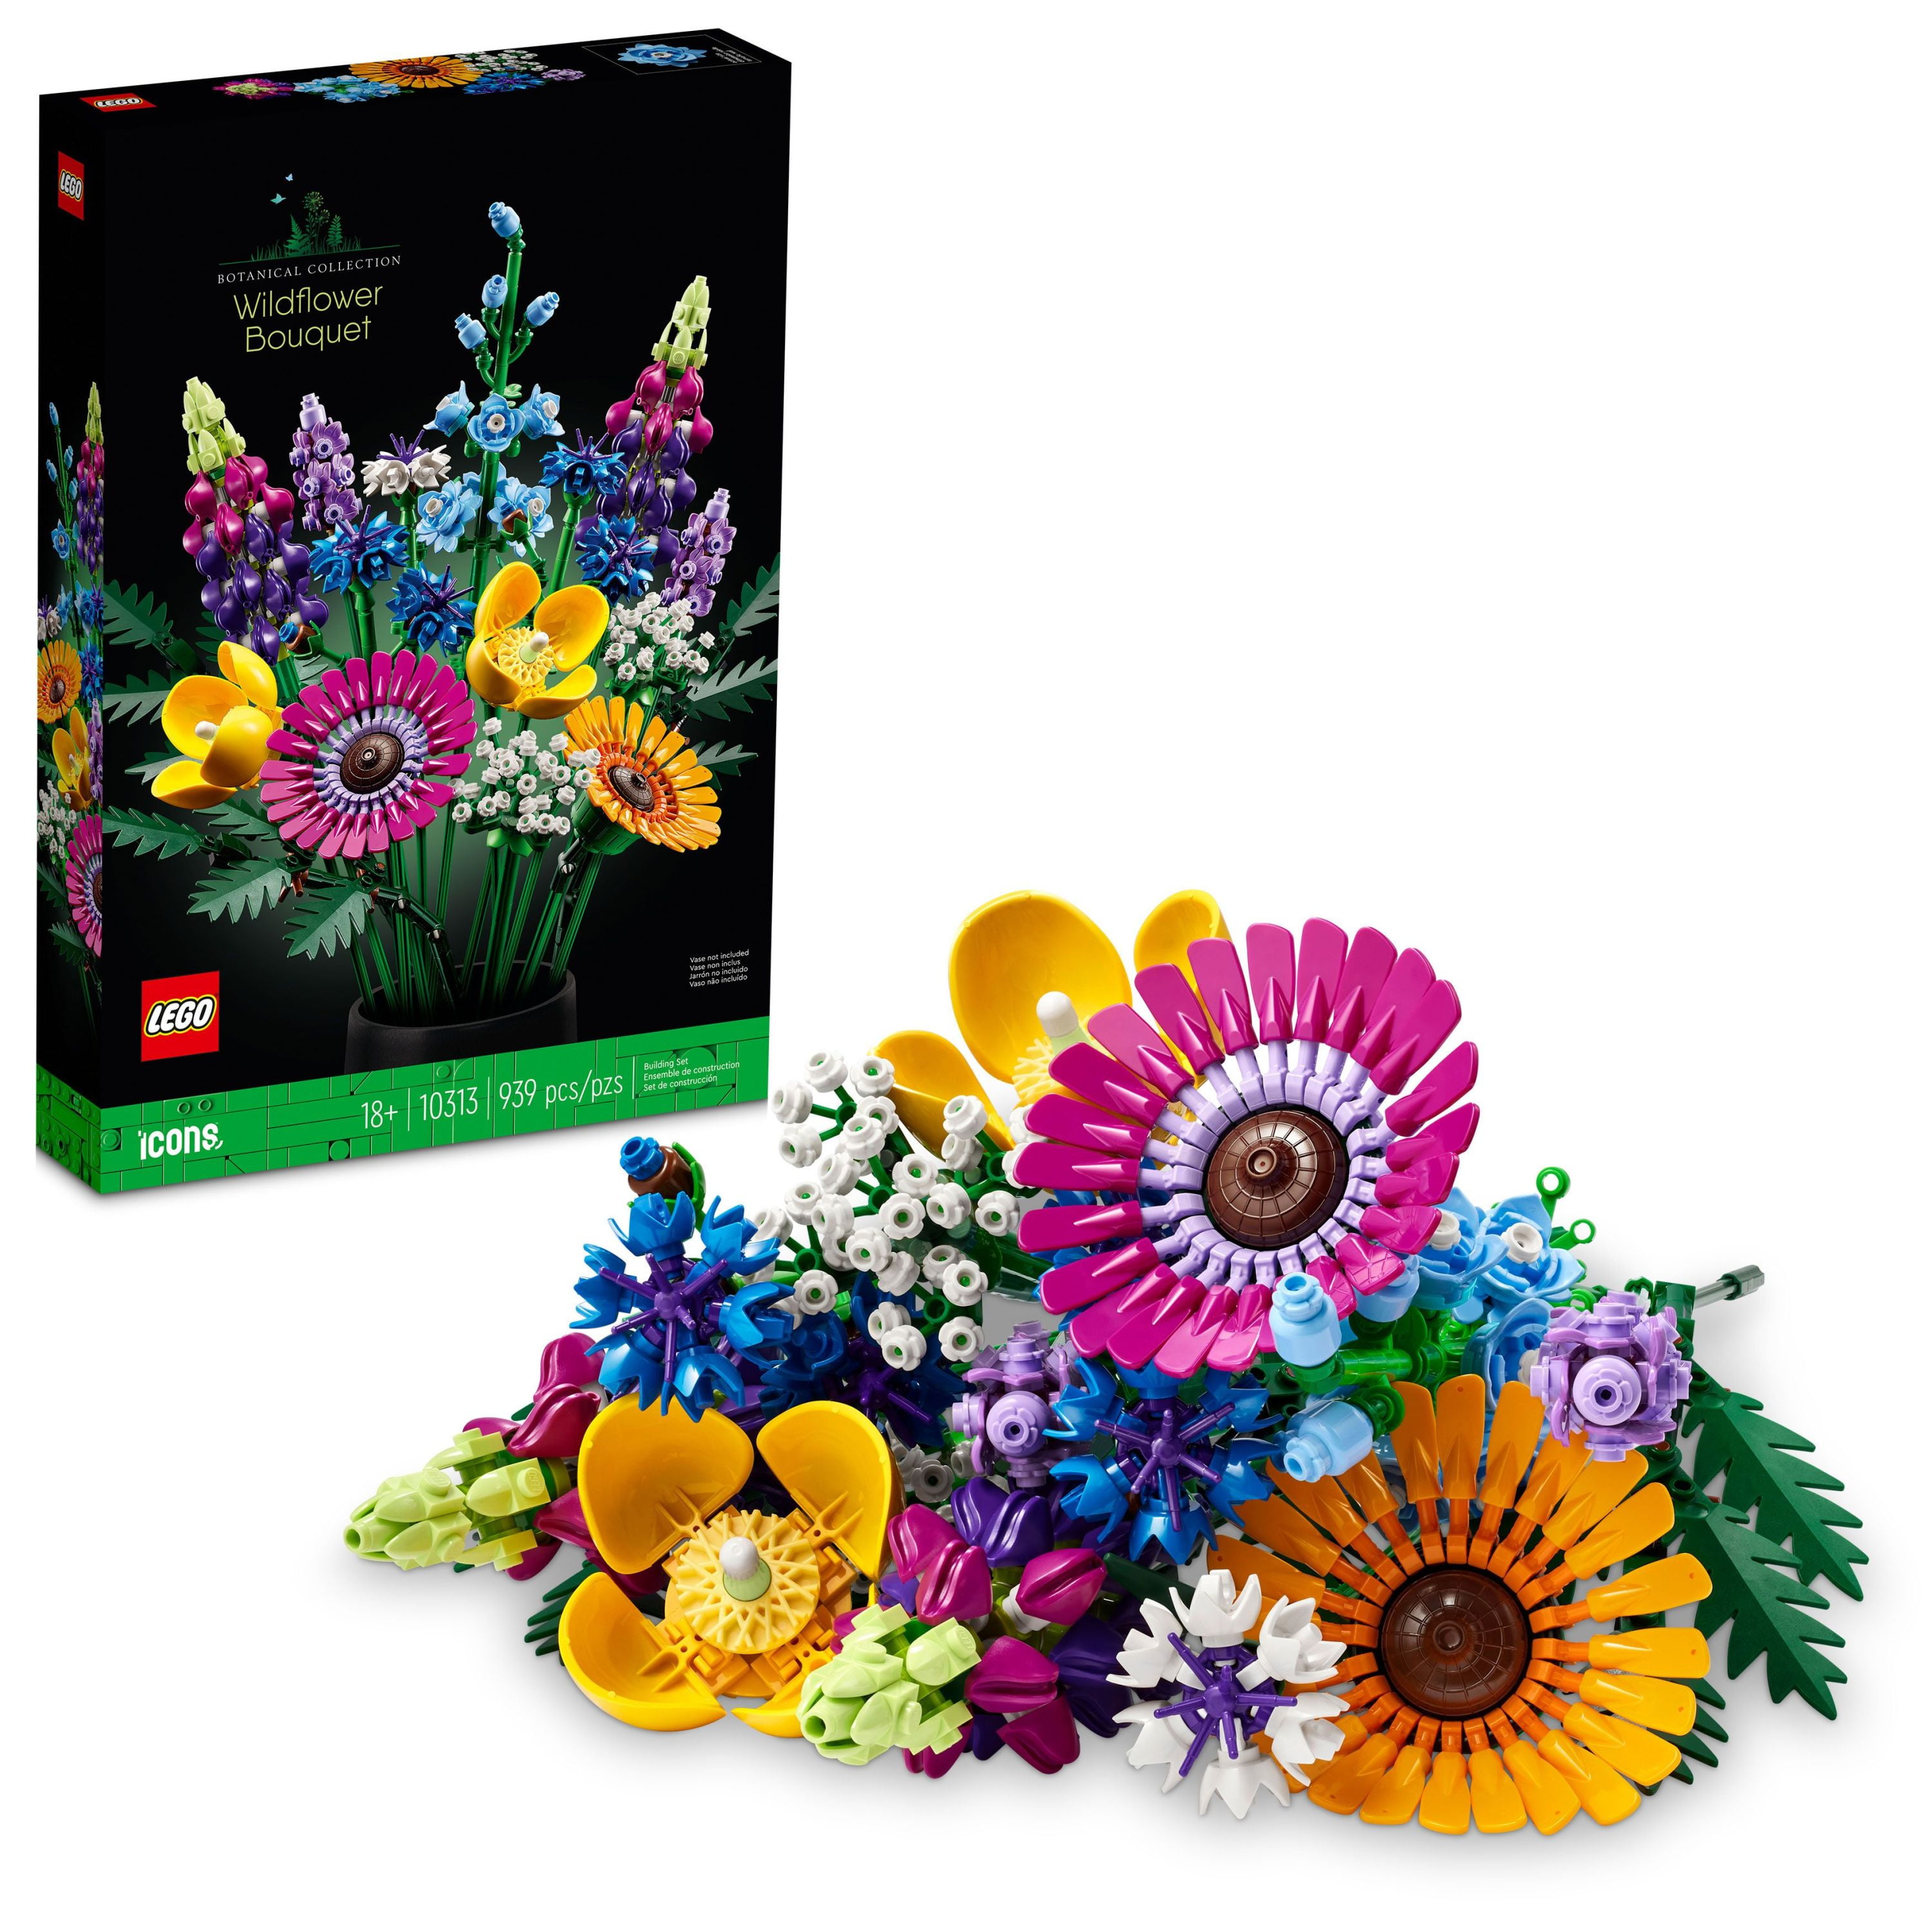 Lego Icons Wildflower Bouquet 10313 Set - Artificial Flowers, Adult  Botanical Collection, Unique Home Décor Piece, Makes A Great Anniversary  Gift For Wife - Walmart.Com